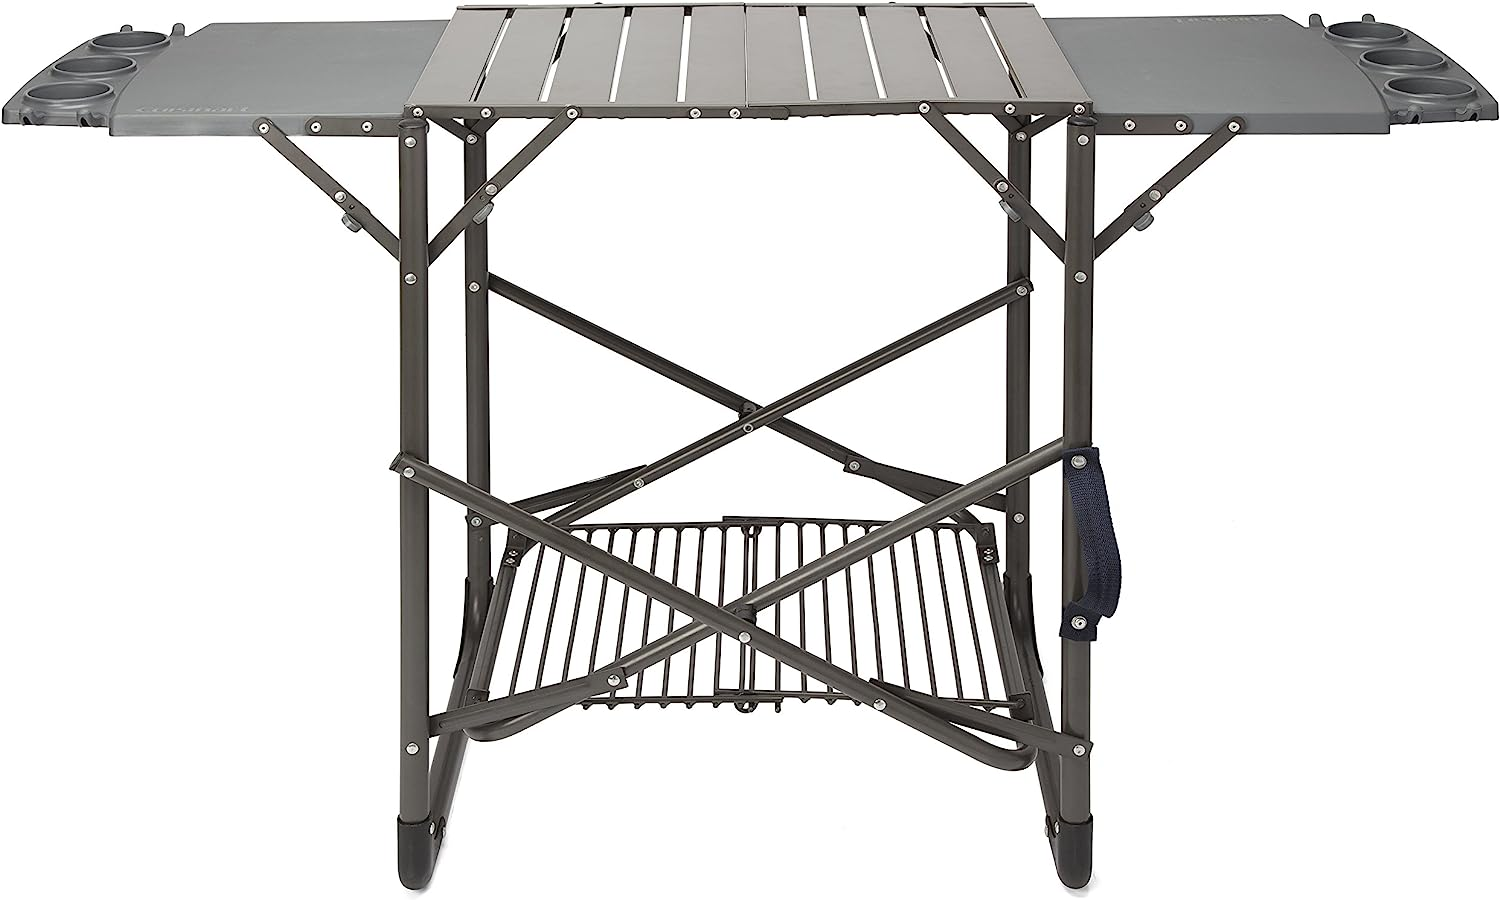 Cuisinart Take Along Grill Stand $79.93